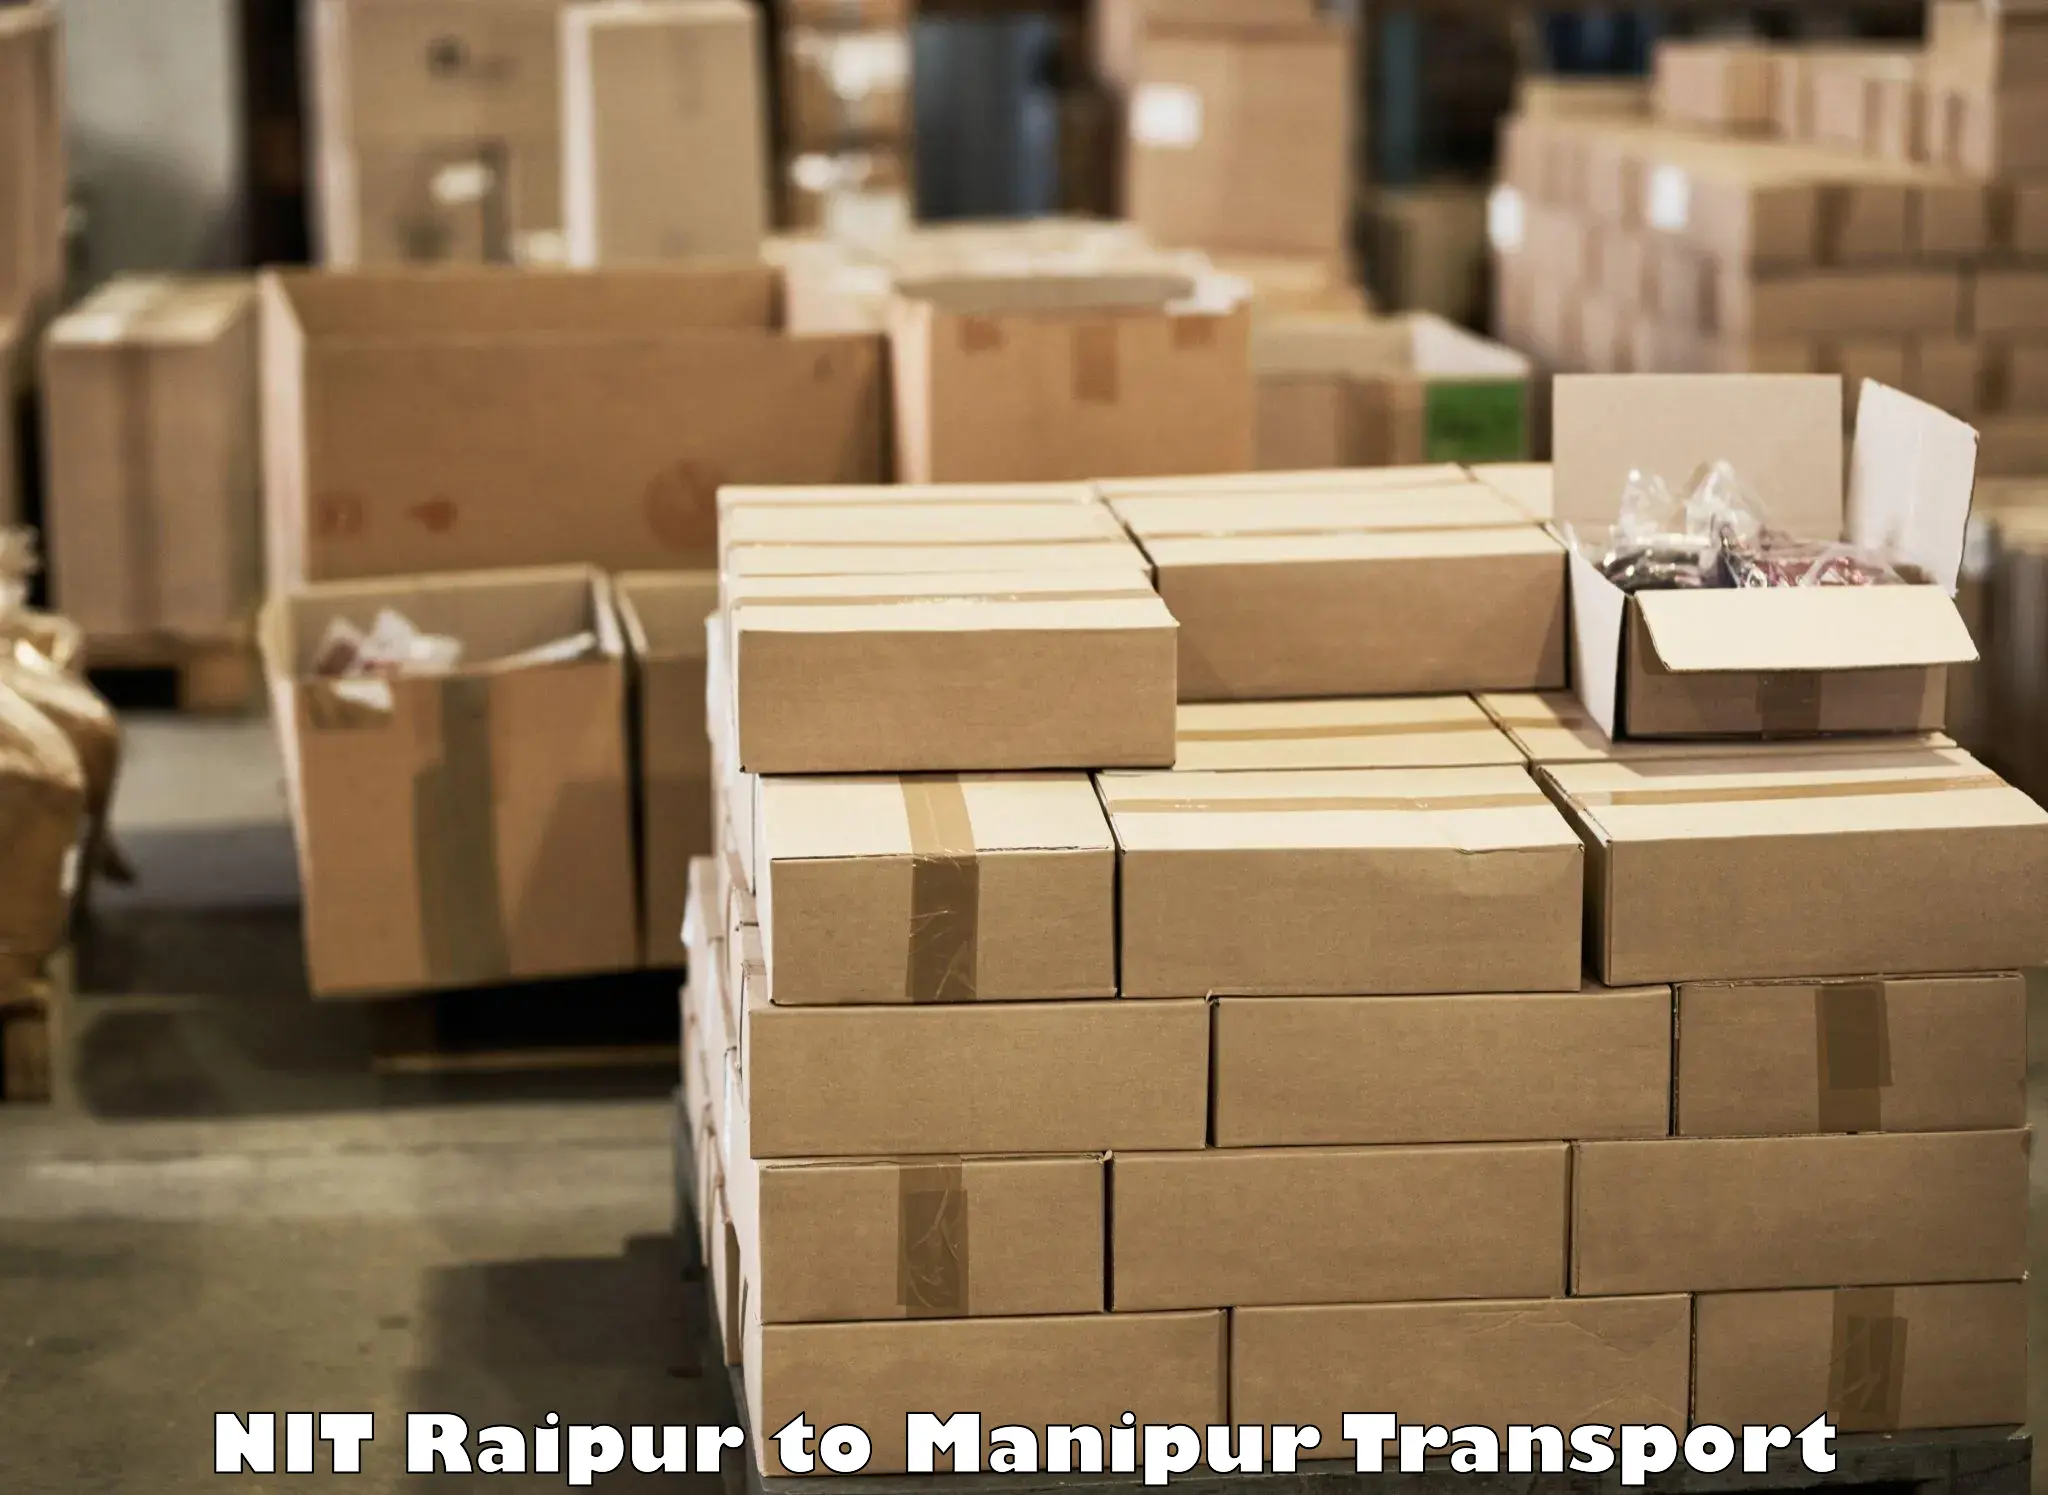 Vehicle transport services NIT Raipur to Chandel